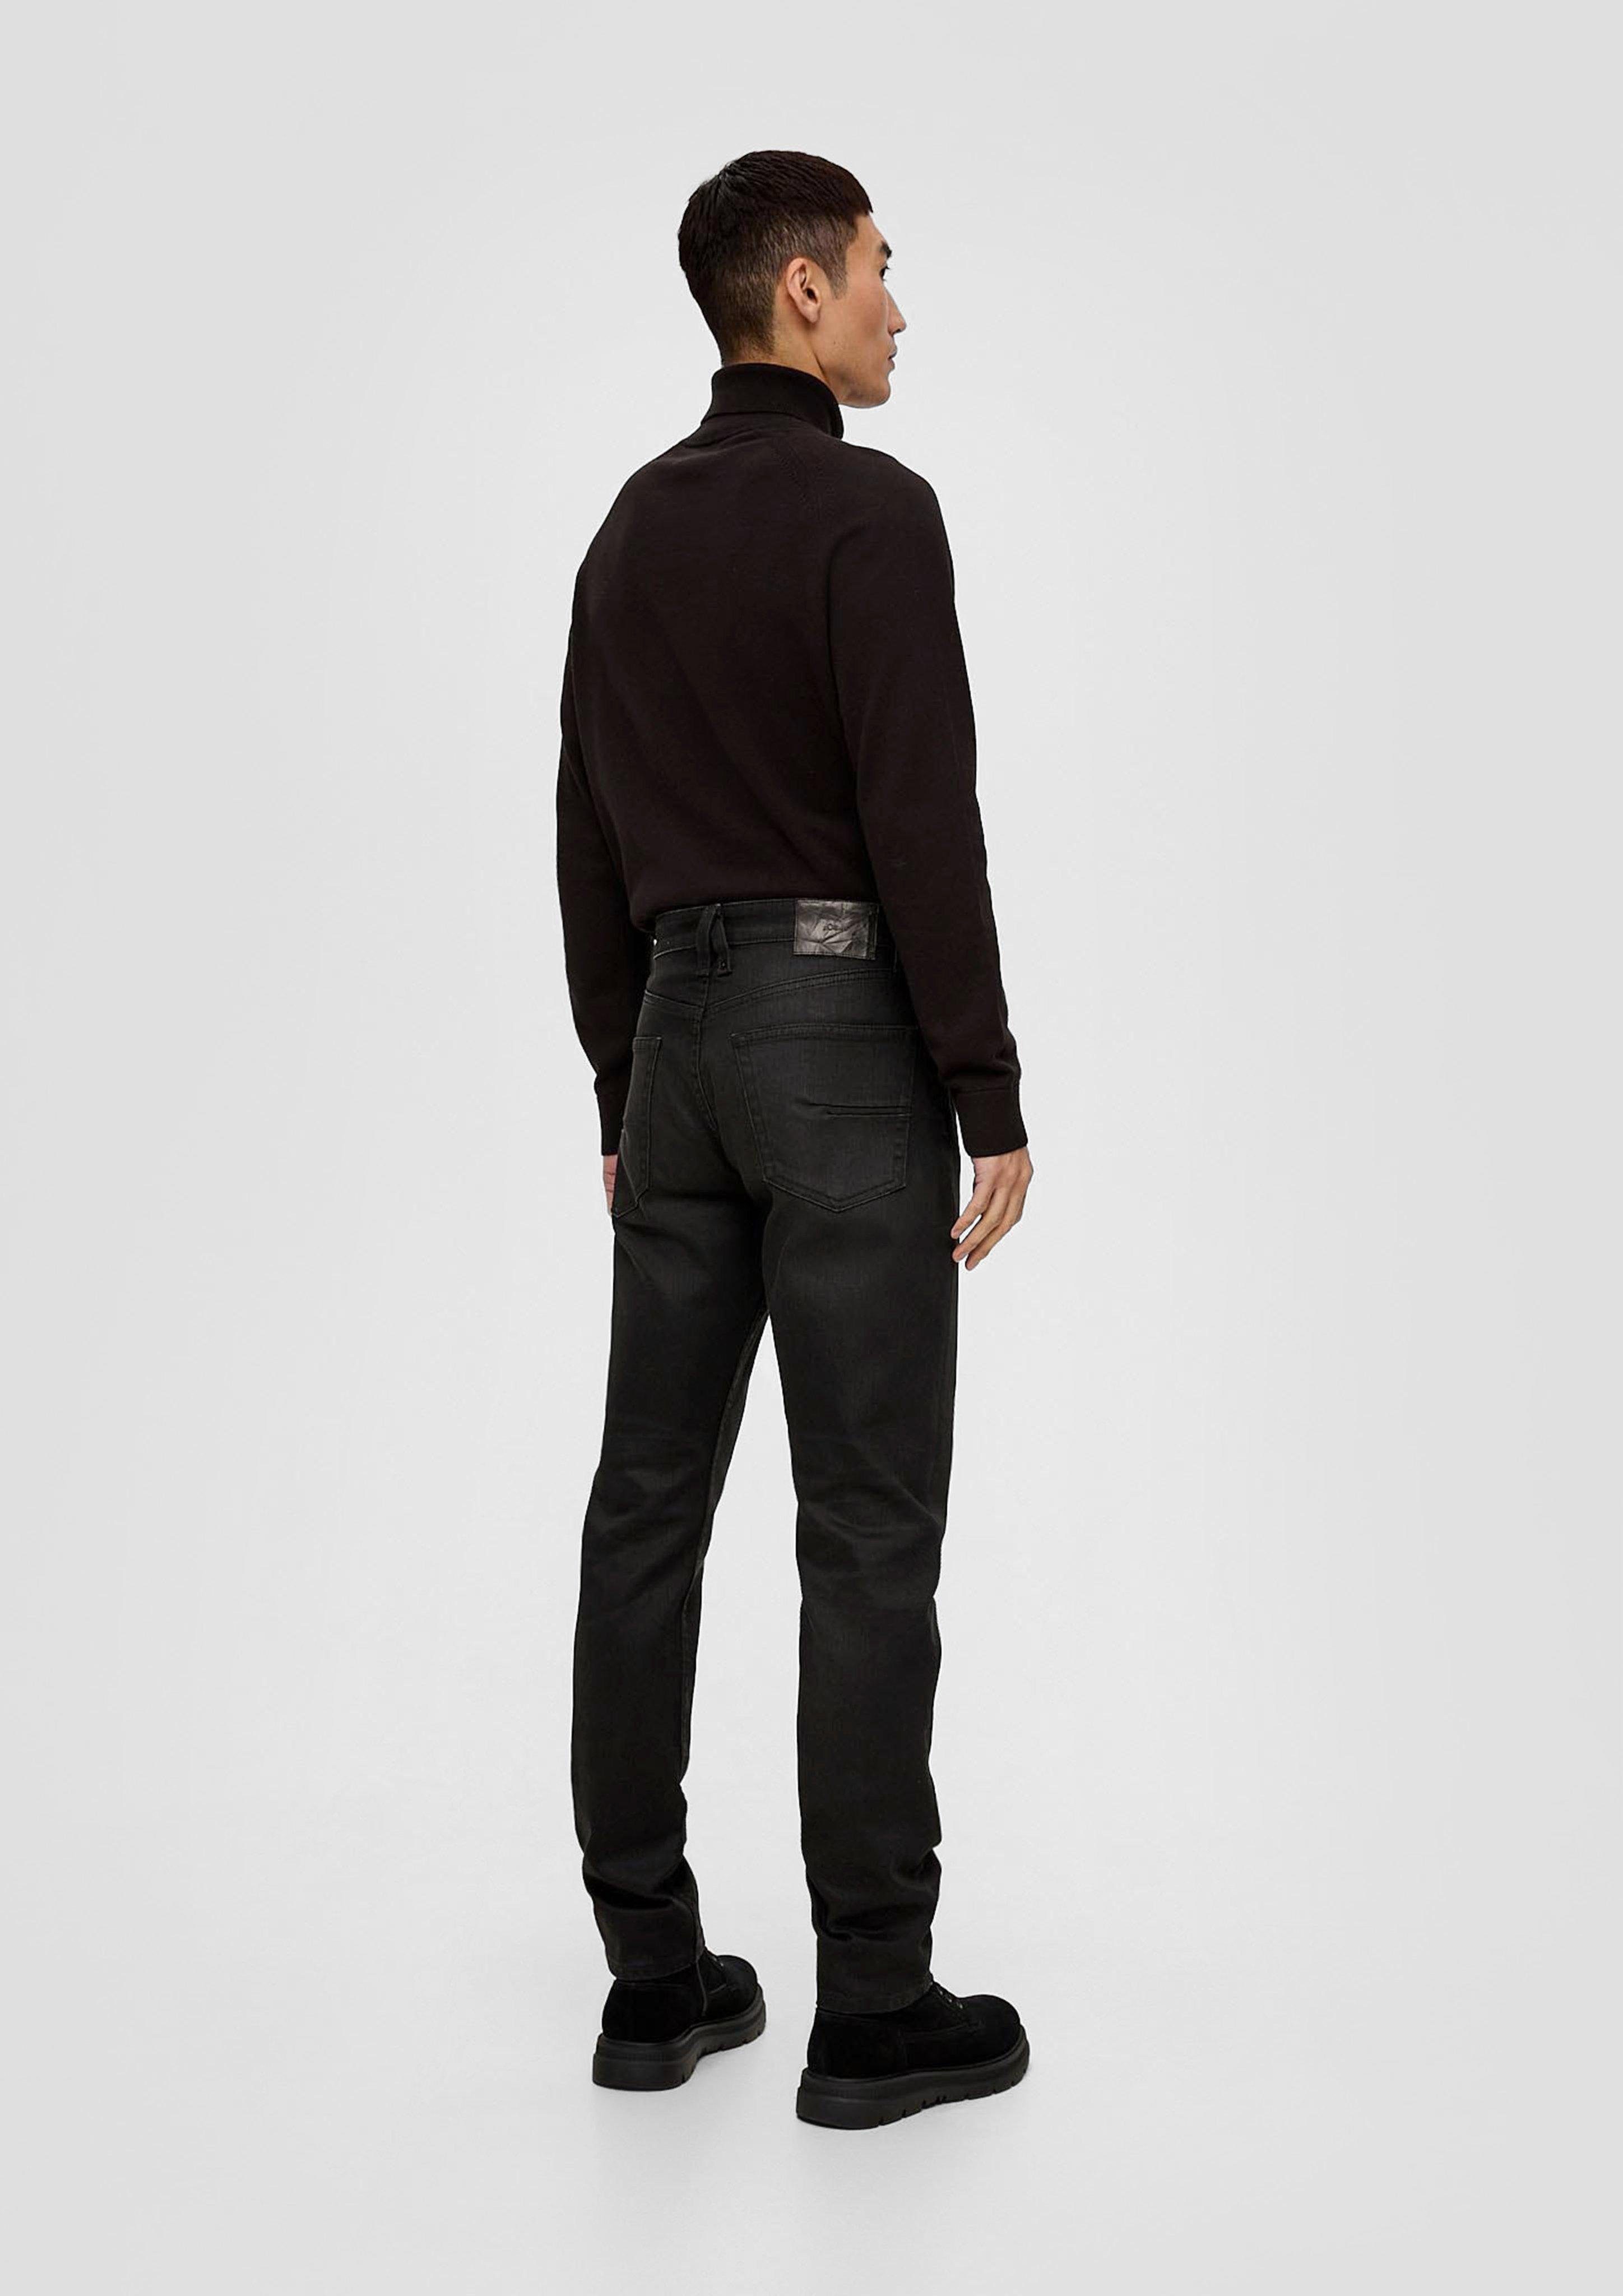 Stoffhose Regular Label-Patch schwarz / Mid Leg Mauro / Tapered Fit s.Oliver Rise / Jeans